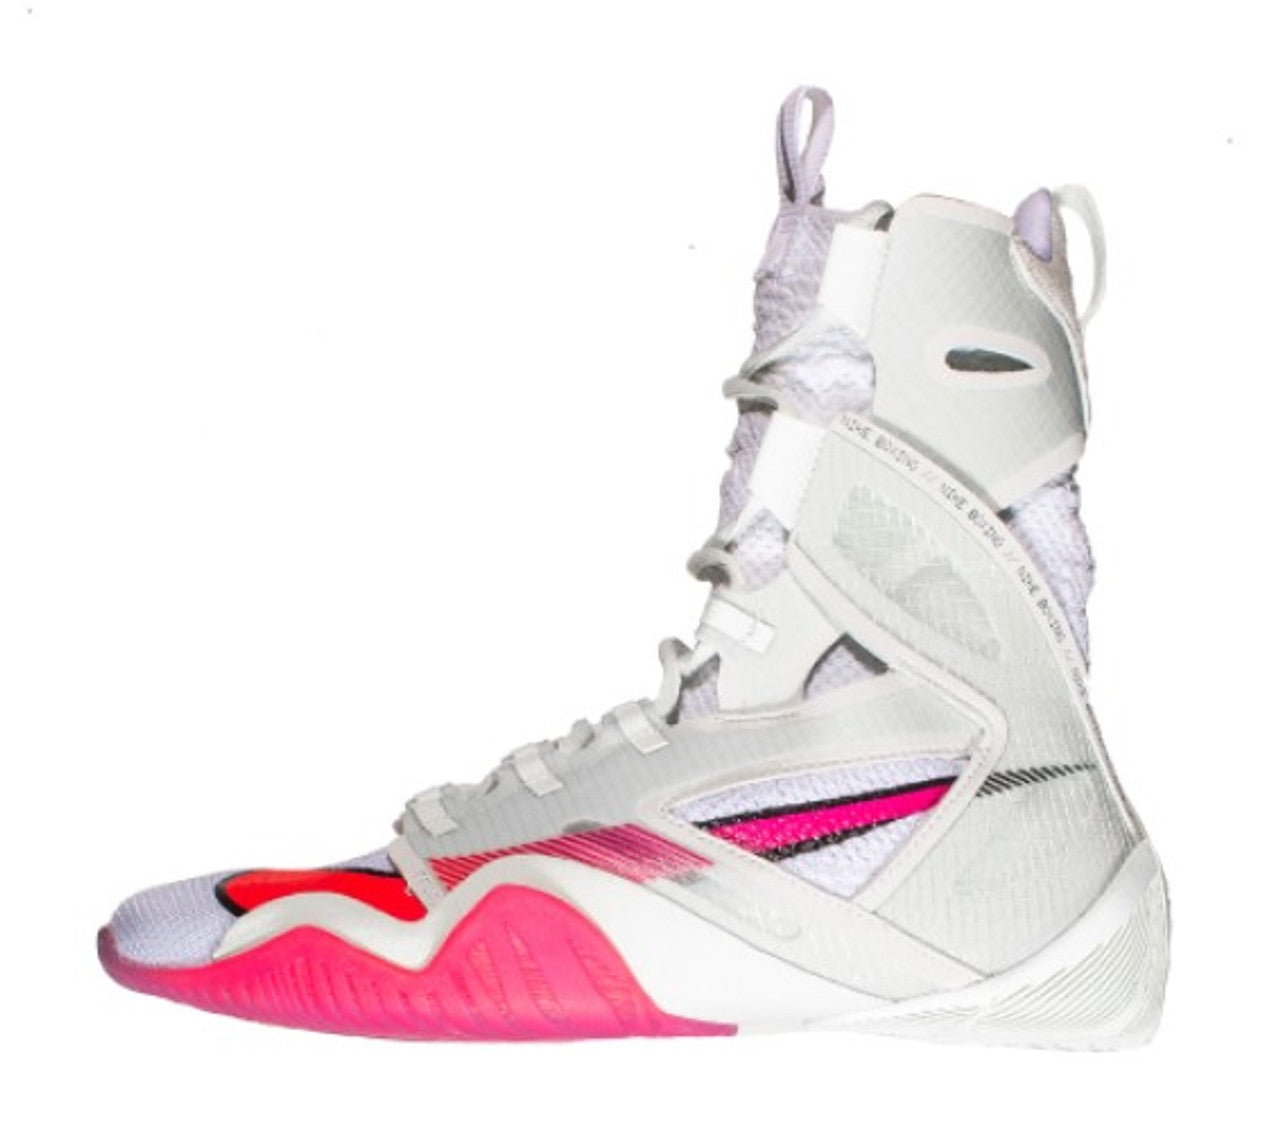 NIKE HYPERKO 2 SPECIAL LIMITED EDITION - Olympic Version! WHITE/HYPER VIOLET/LIGHT